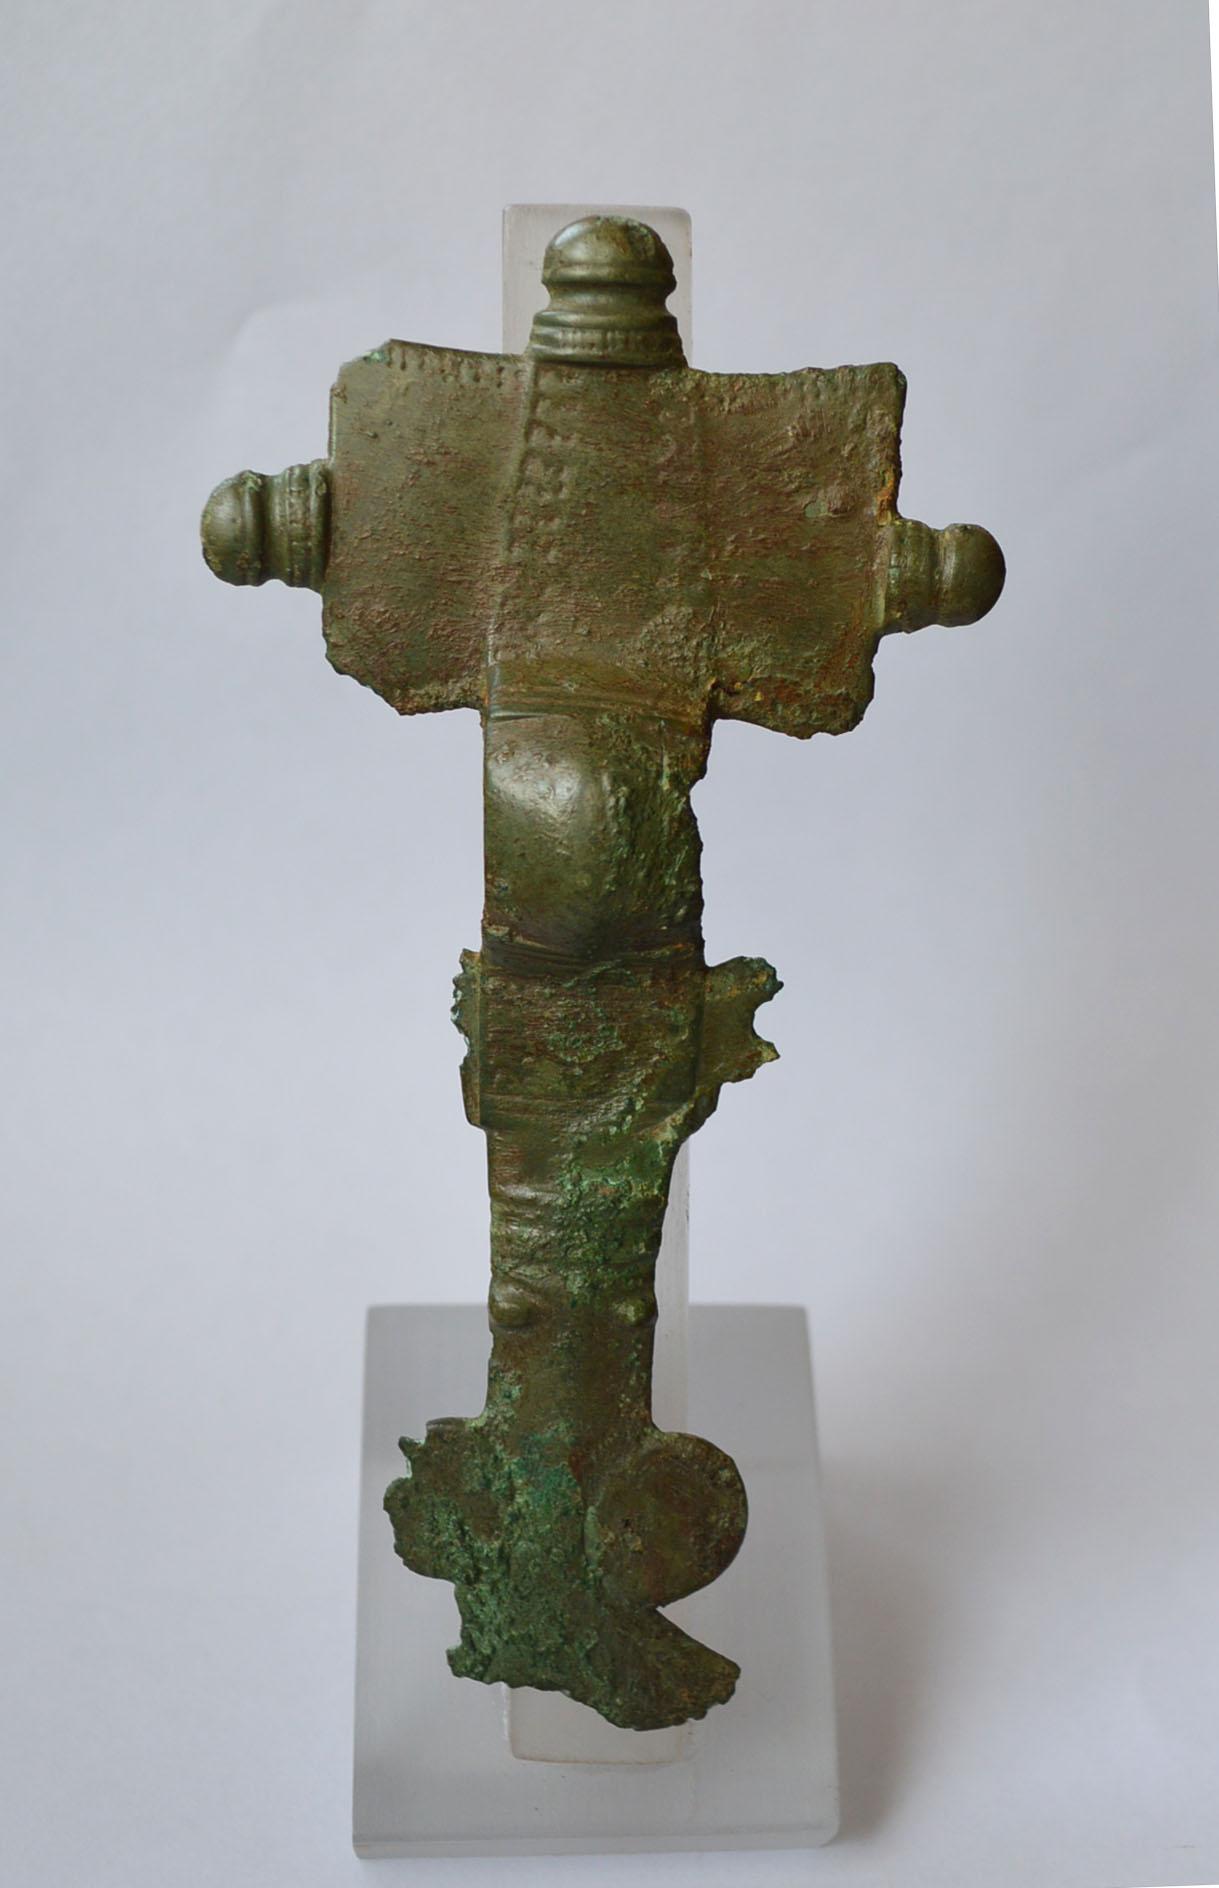 A rare large early Anglo Saxon cruciform headed plate brooch, circa 5th-6th Century A.D.
The large rectangular cruciform head plate bronze brooch adorned on the sides with rounded finials, the lower part
decorated with circular motives, found in